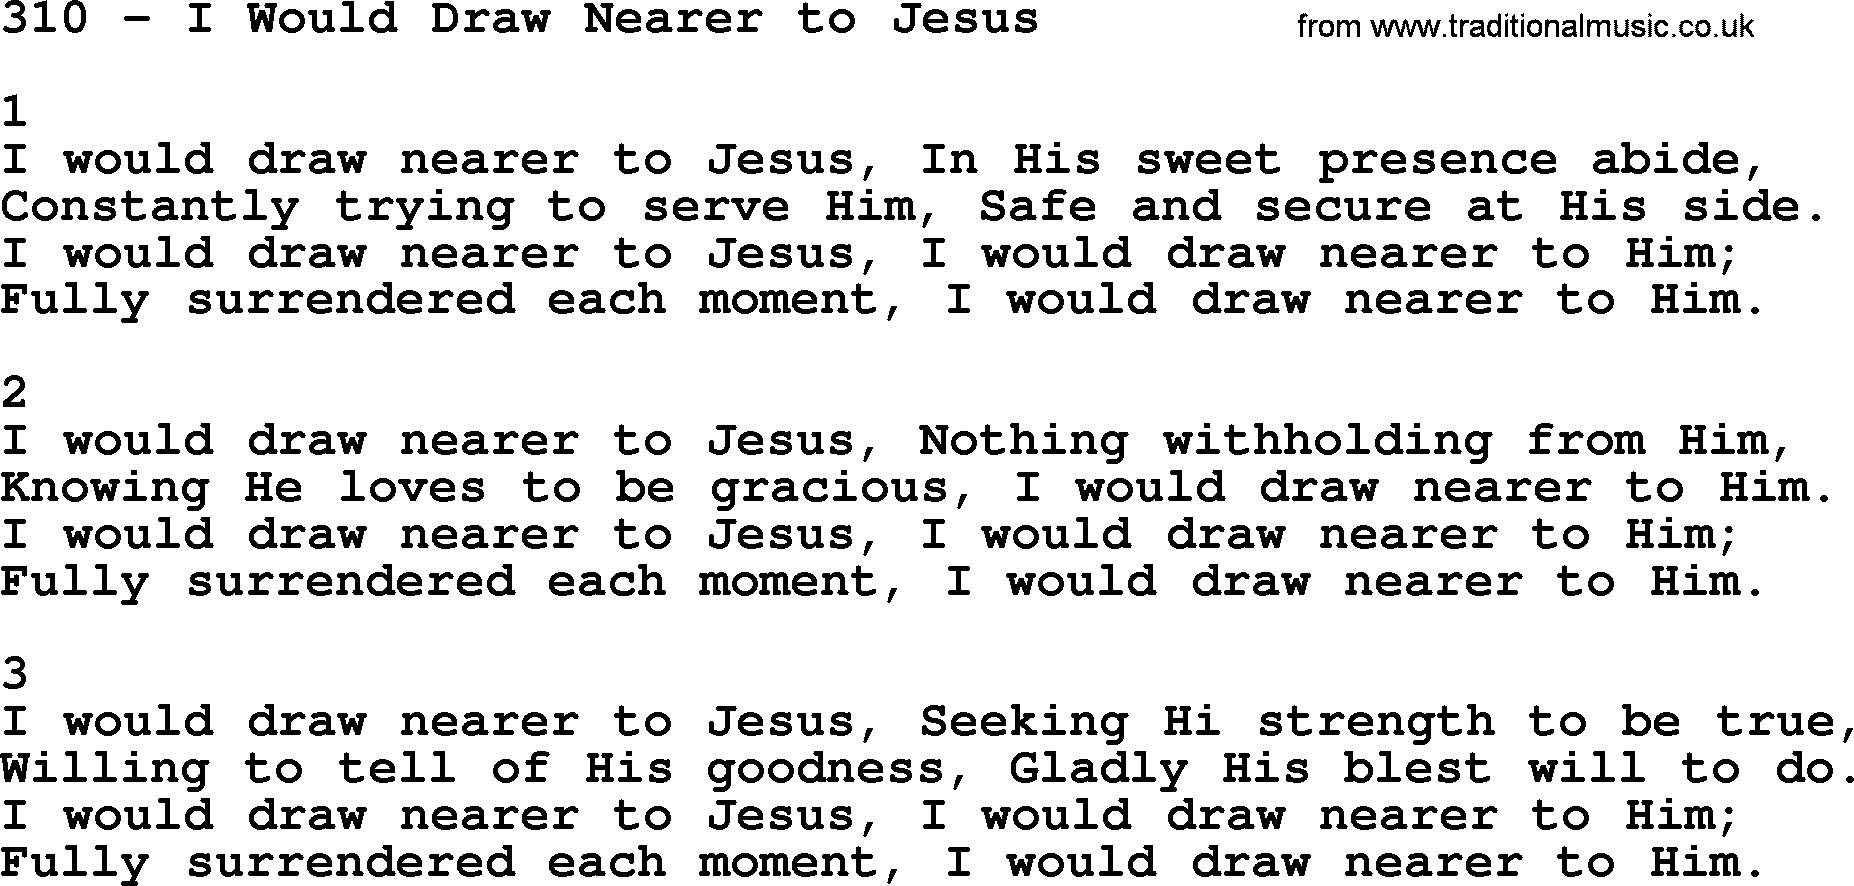 Complete Adventis Hymnal, title: 310-I Would Draw Nearer To Jesus, with lyrics, midi, mp3, powerpoints(PPT) and PDF,